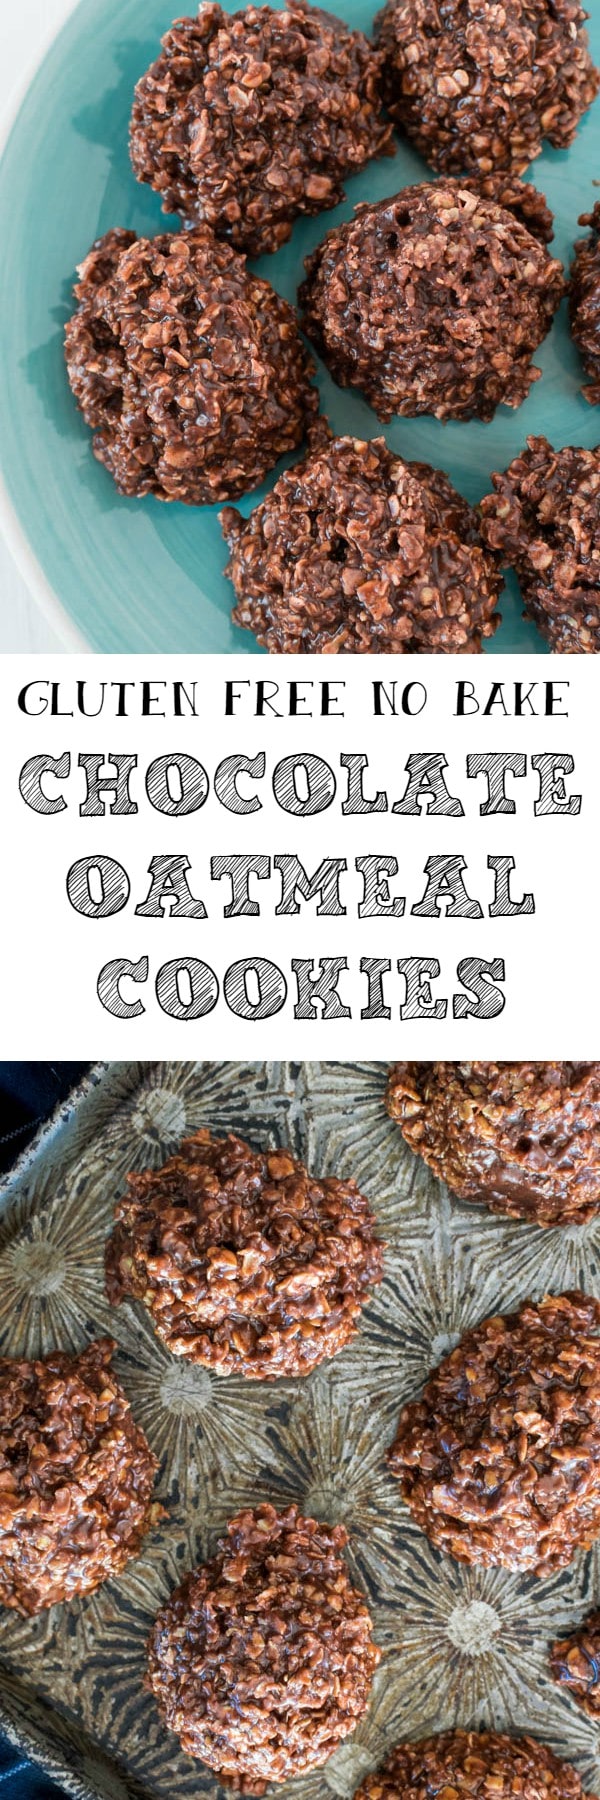 These No Bake Chocolate Oatmeal Cookies are perfect for when you have a sweet tooth that needs satisfying immediately. It's also a great first recipe for getting kids involved in the kitchen, since you don't even have to turn on the stove.